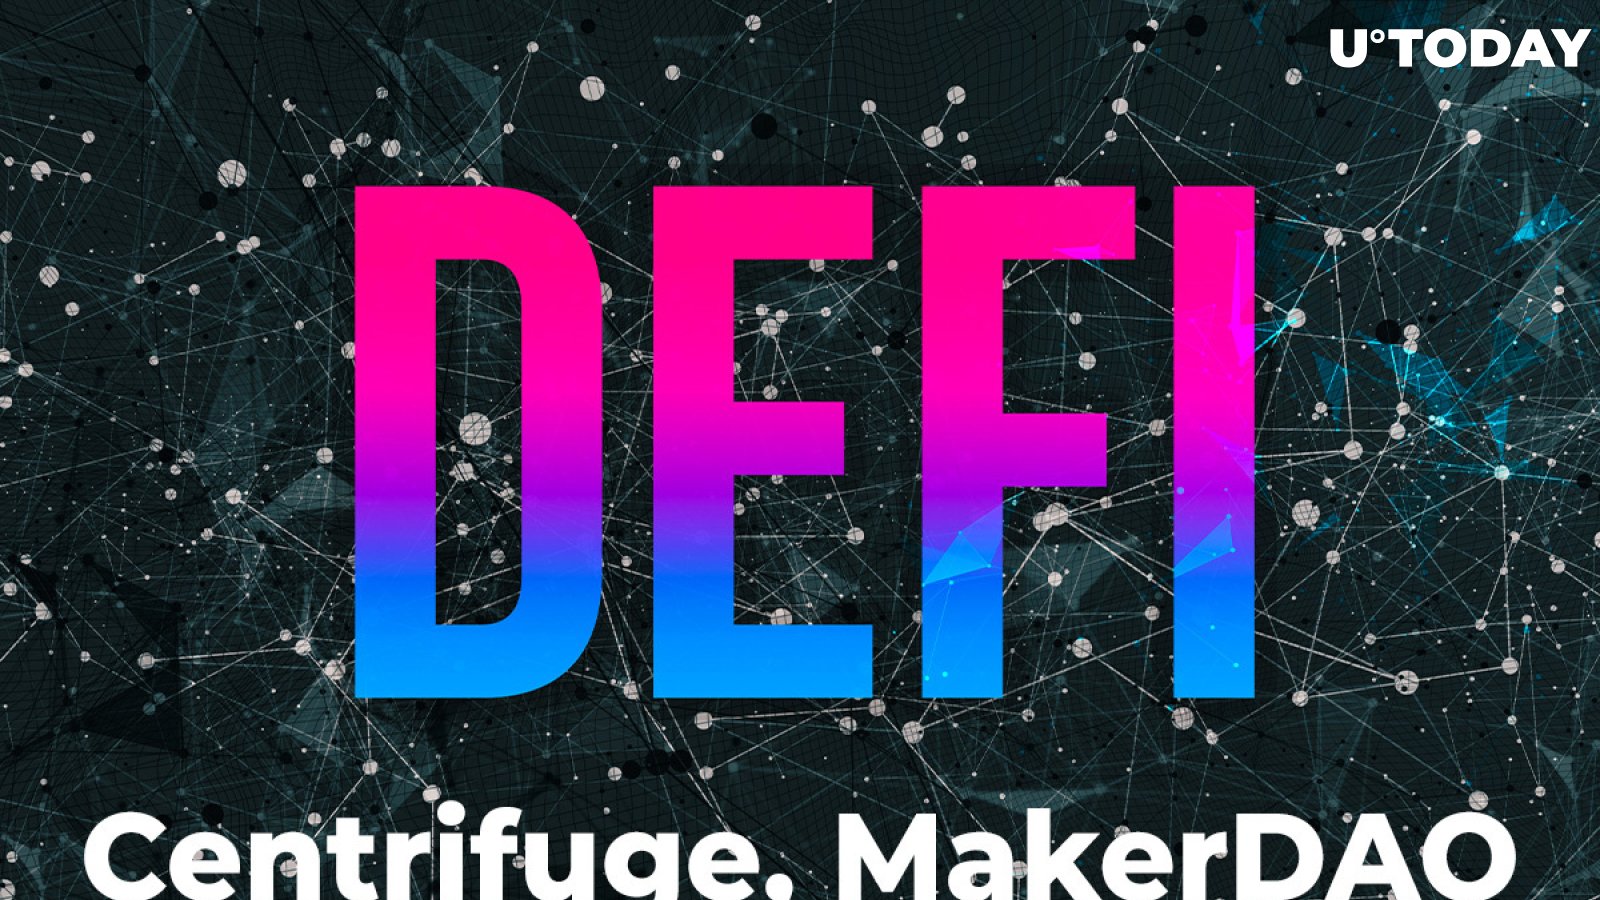 Centrifuge, MakerDAO Reshape DeFi Lending with Real-World Assets: Here's How